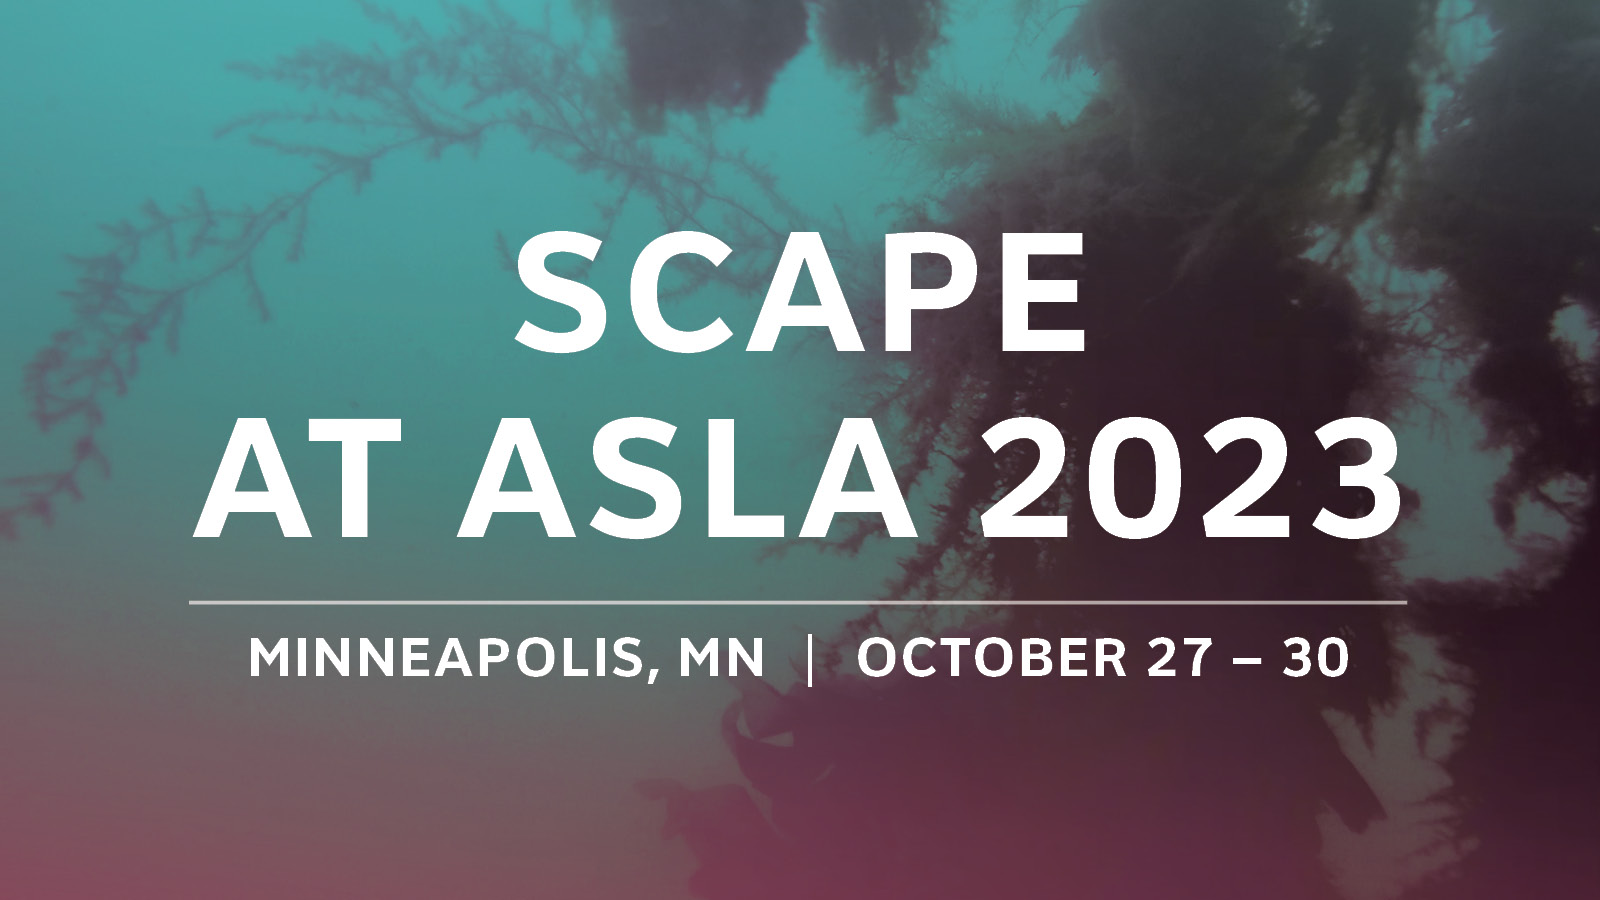 SCAPE at ASLA 2023; Minneapolis, MN; October 27-30